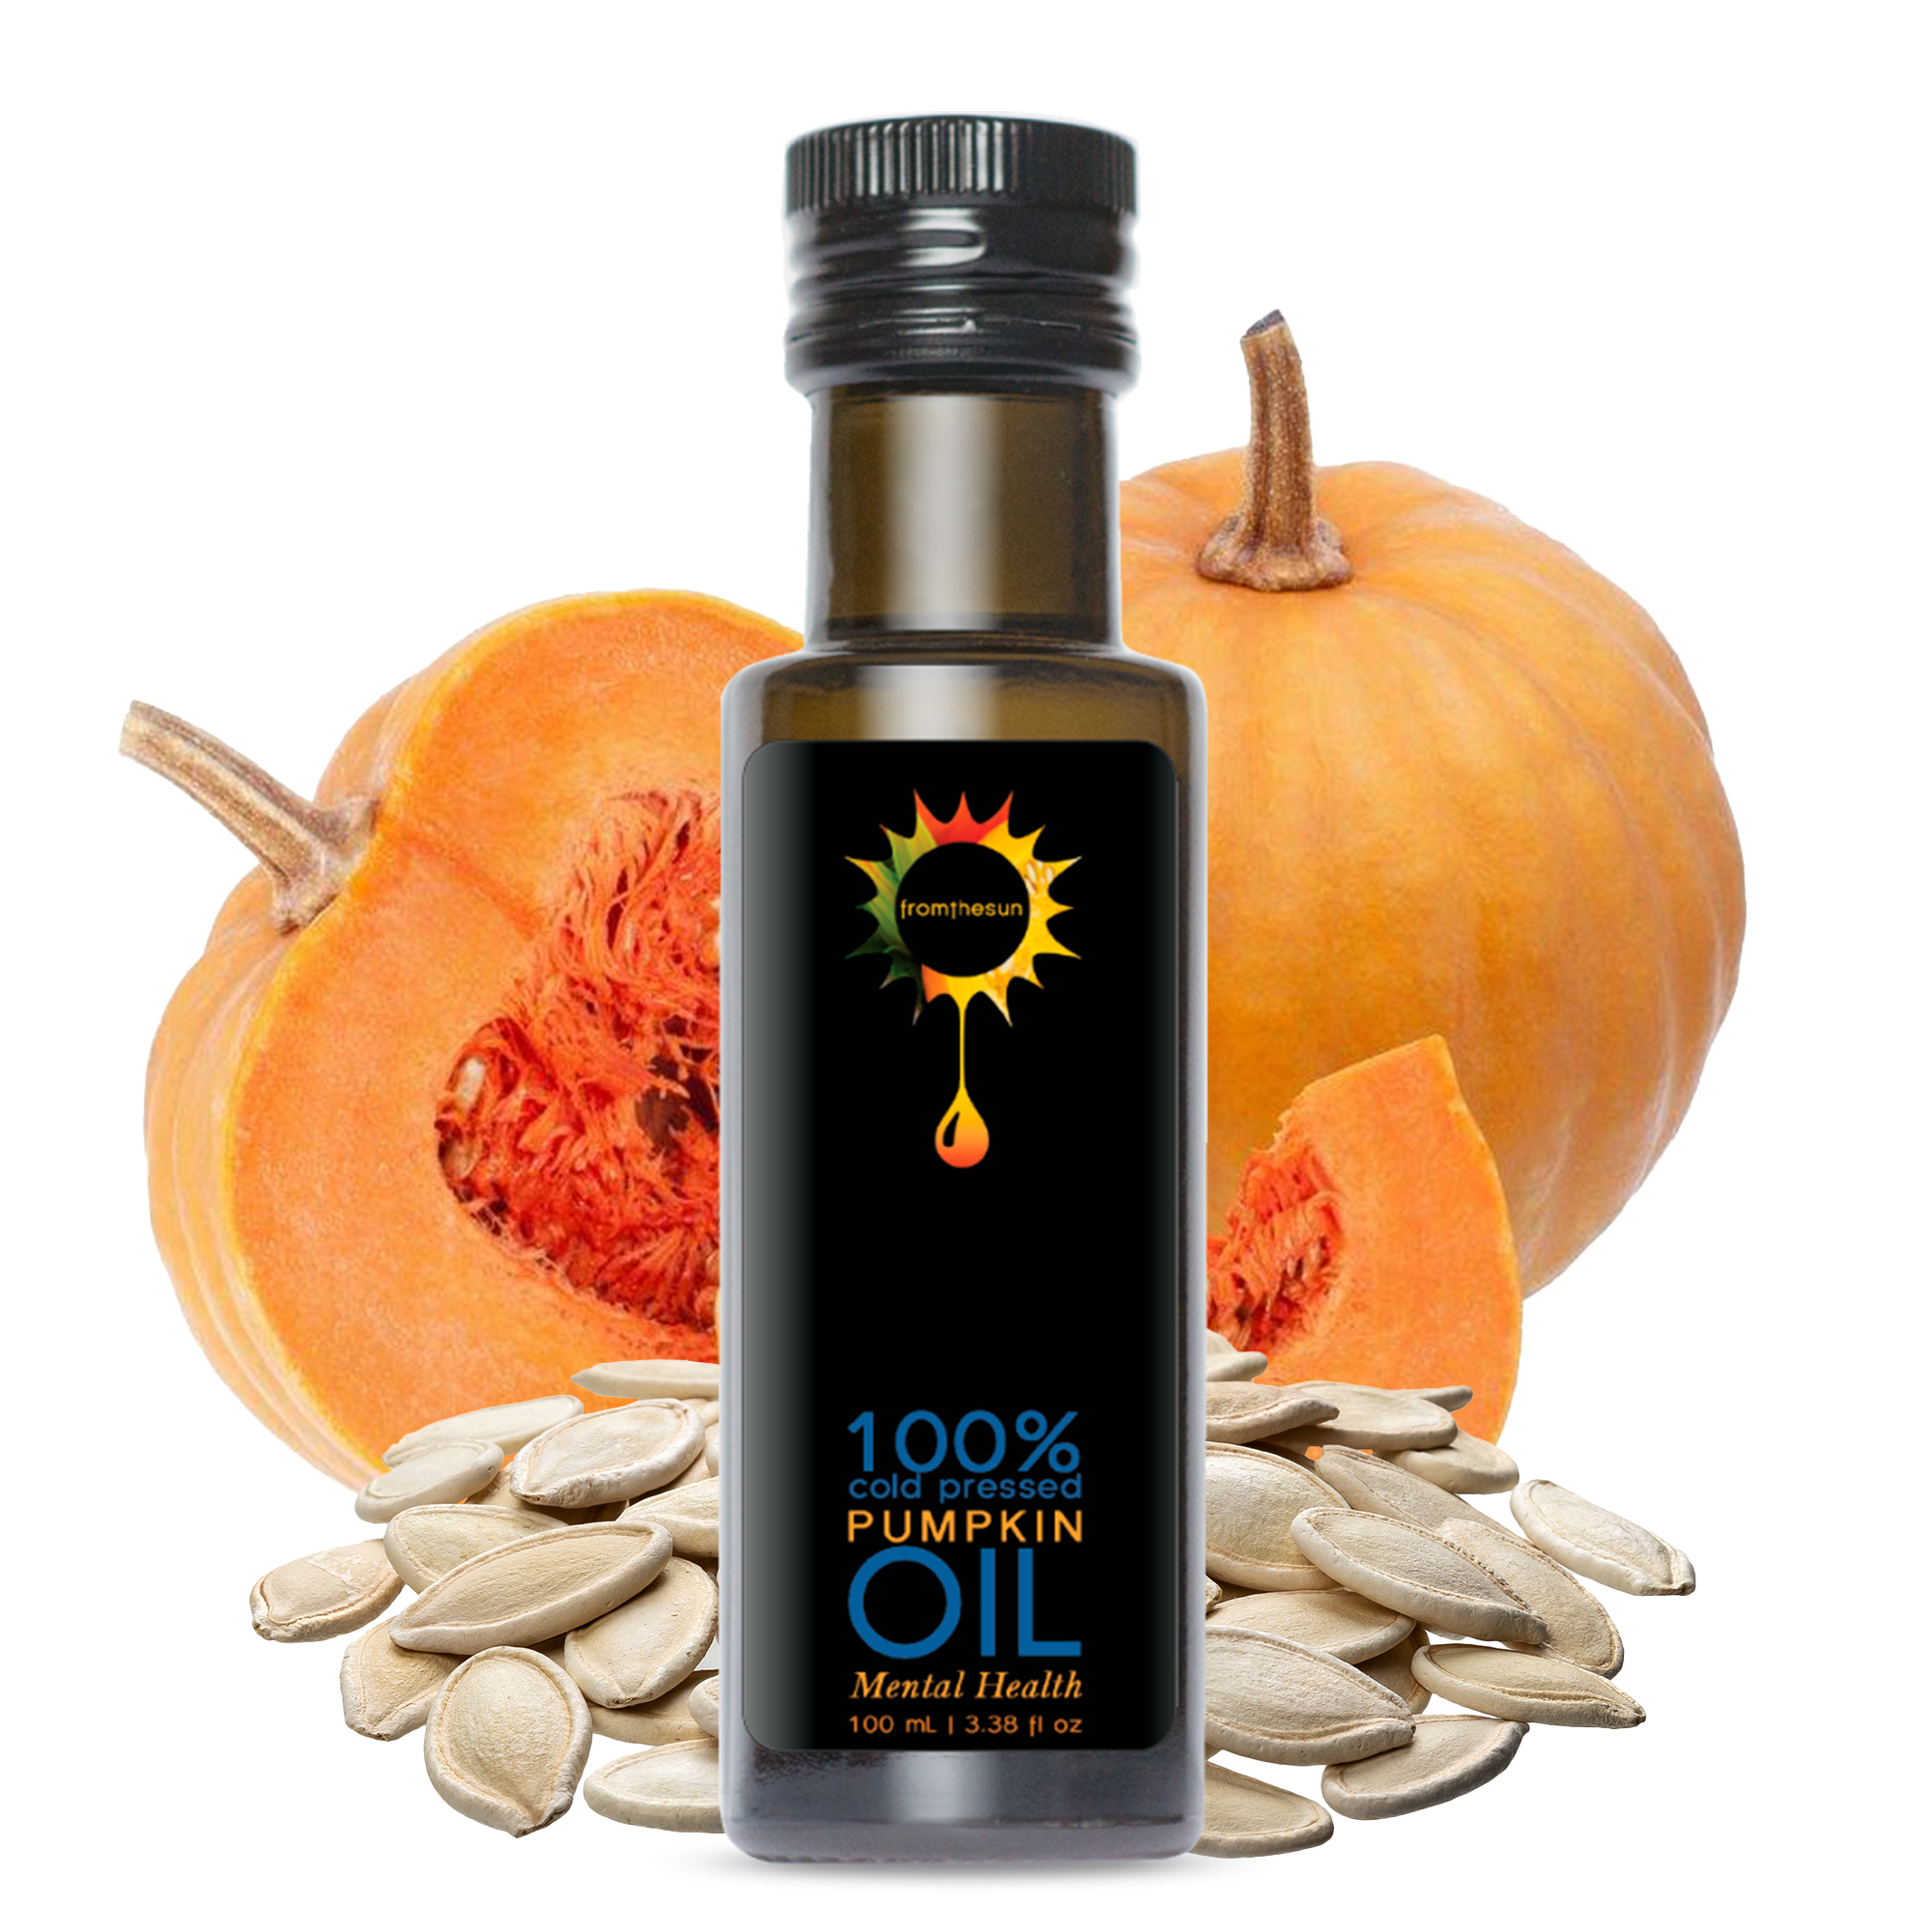 Cold Pressed Pumpkin Seed Oil at Rs 420/ml